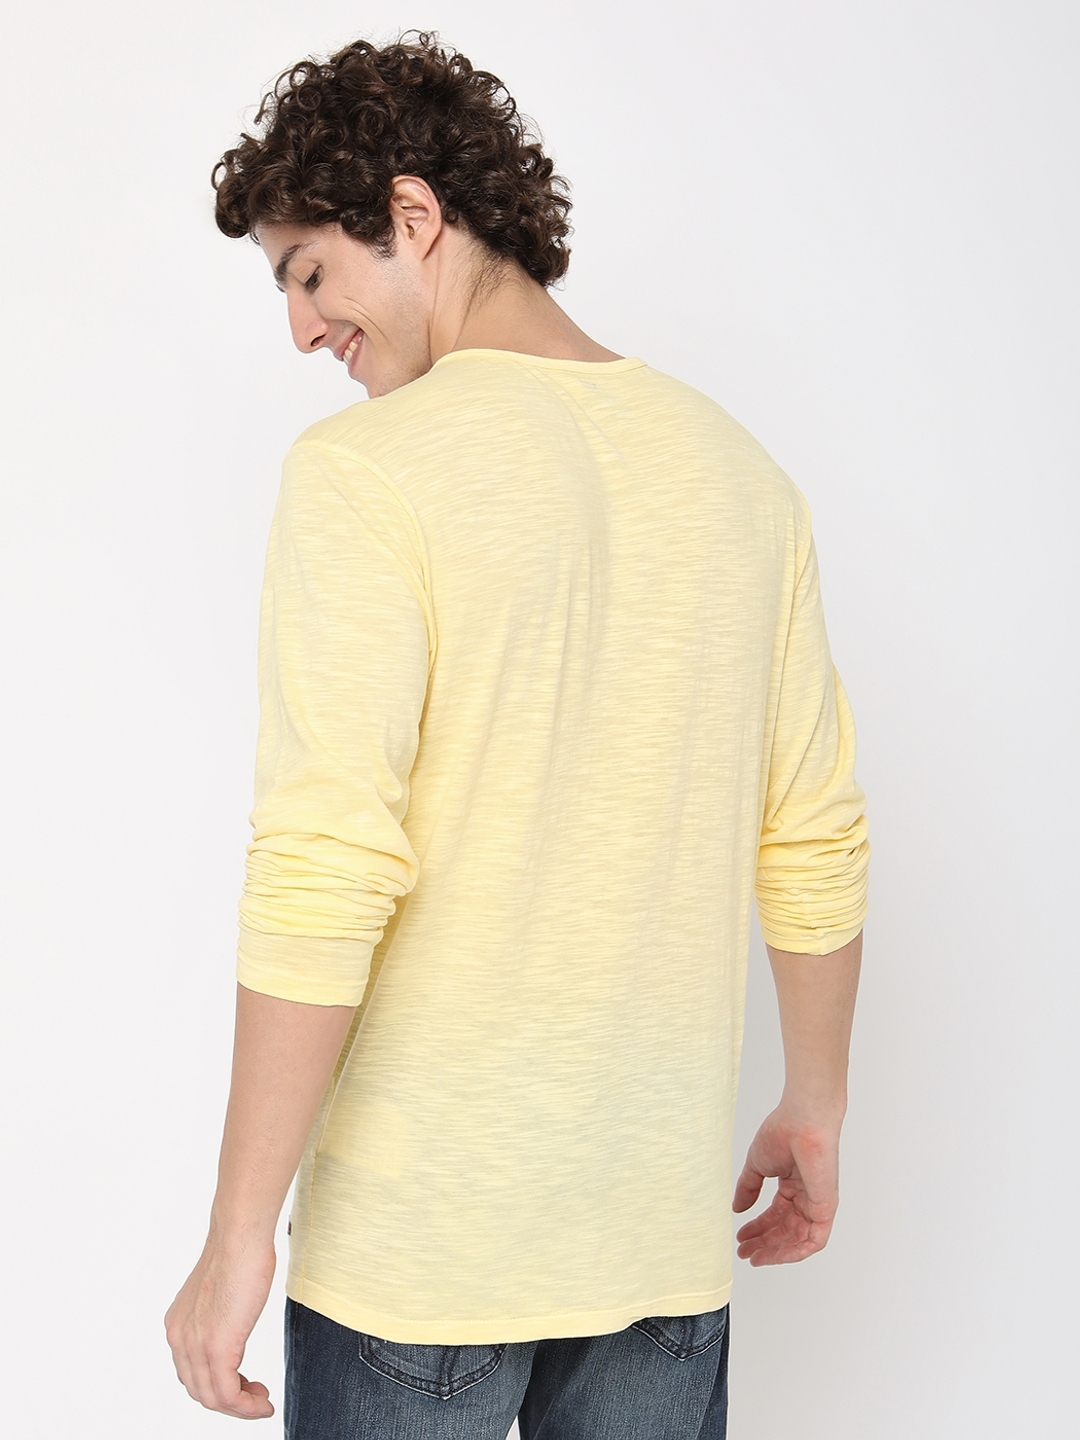 Heathered CPD Slim Fit Henley T-shirt